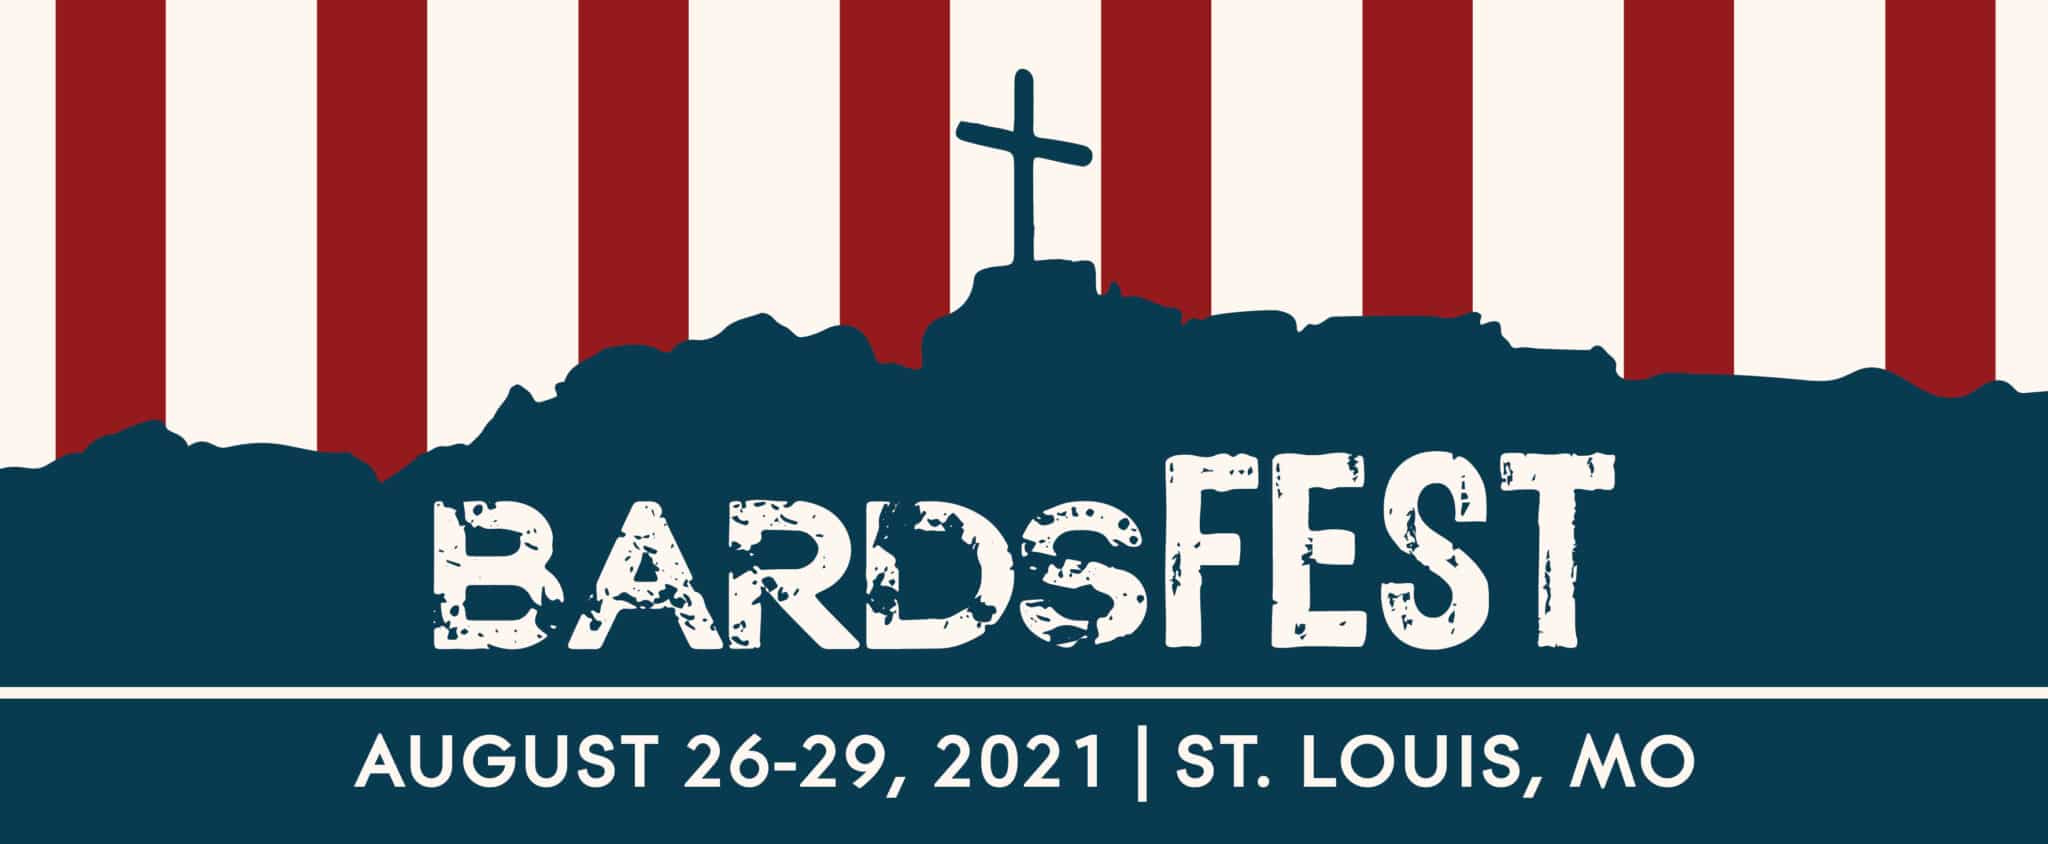 Eventbrite Cancels and Refunds Tickets to Upcoming Christian Event ‘BARDSFEST’ in St. Louis After Hit Piece by Media Matters – Event Will Go On